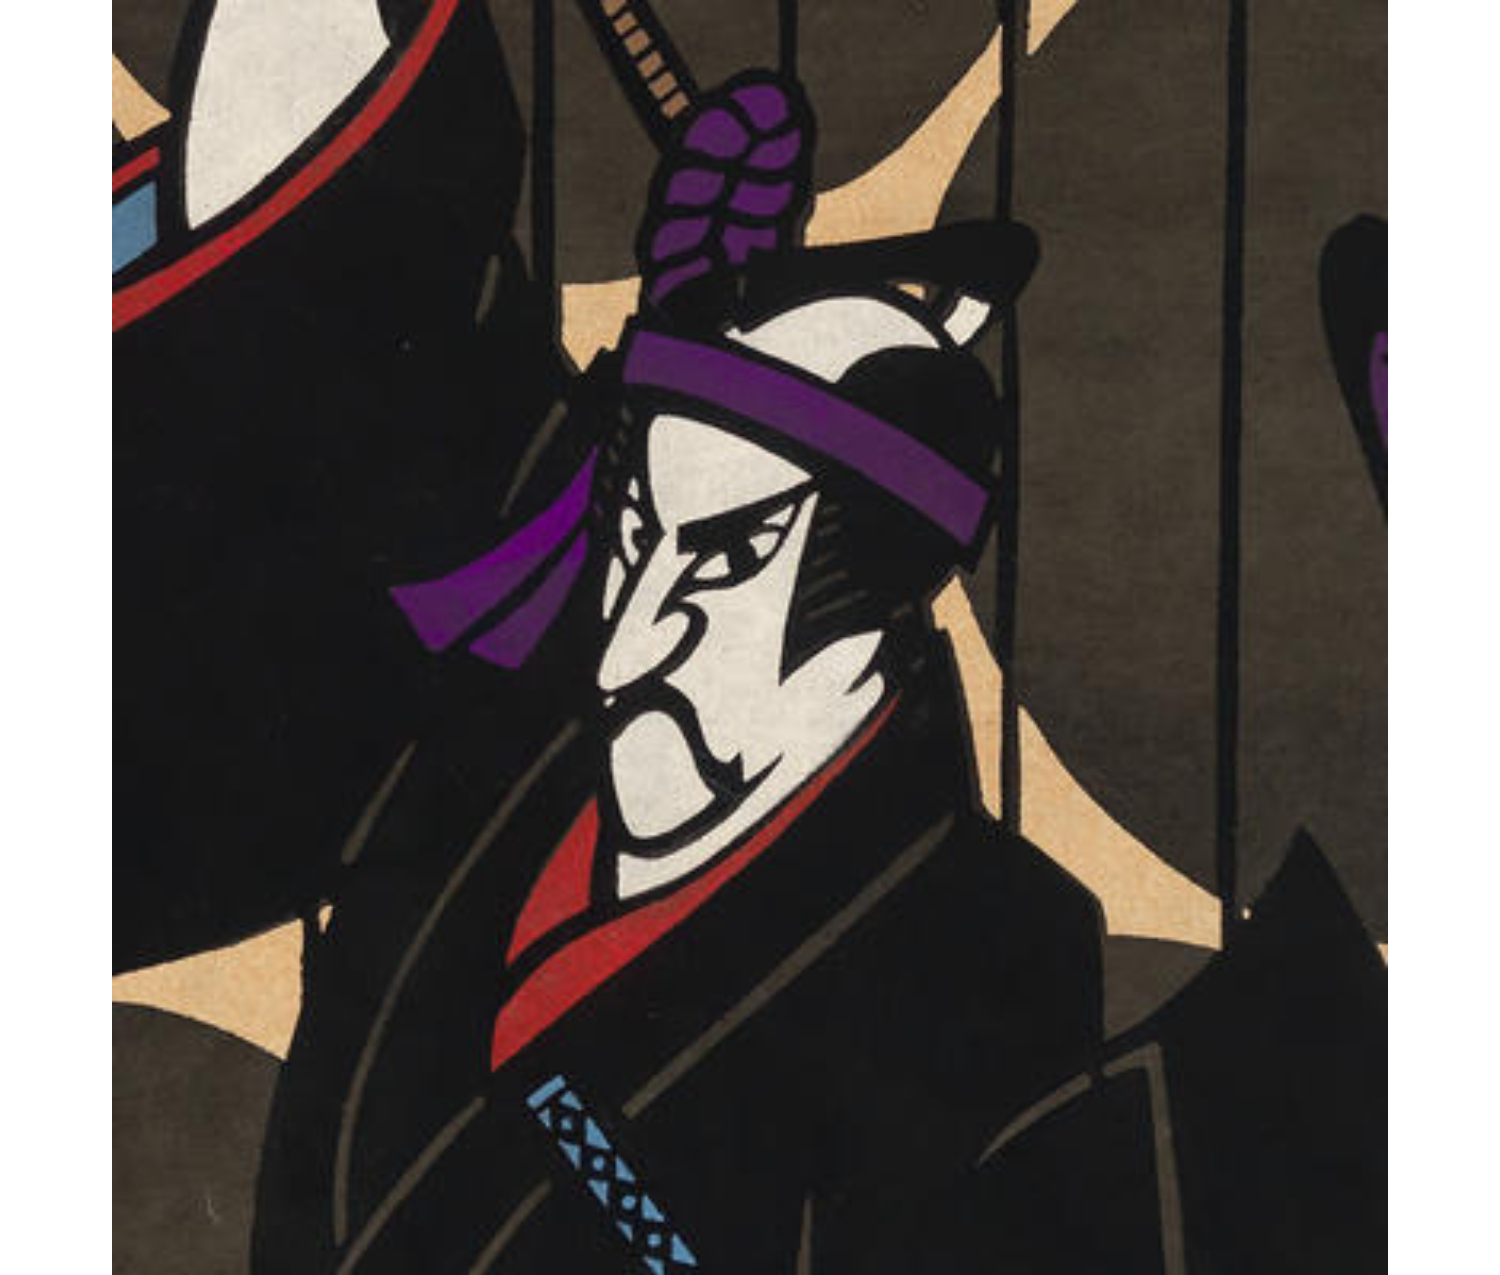 Detail of 'Taru': image of warrior's angry face.